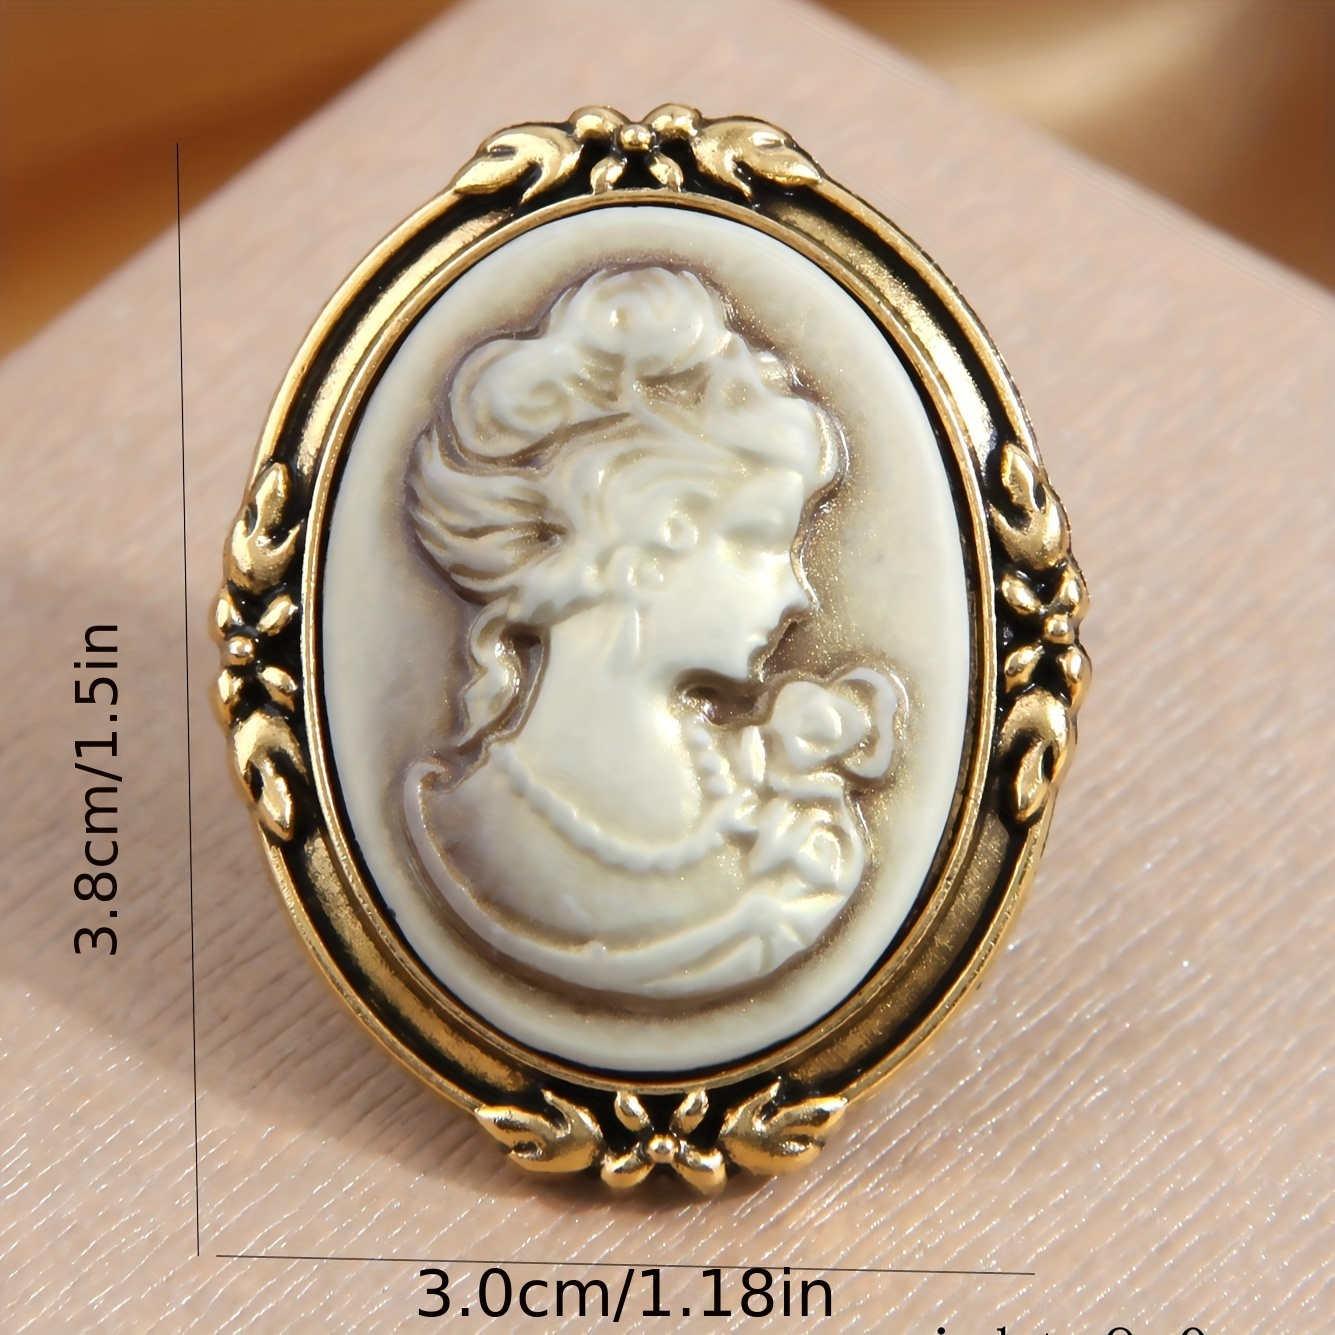 Cameo Brooch Vintage Lady Pin Brooch Bouquet Victorian Costume